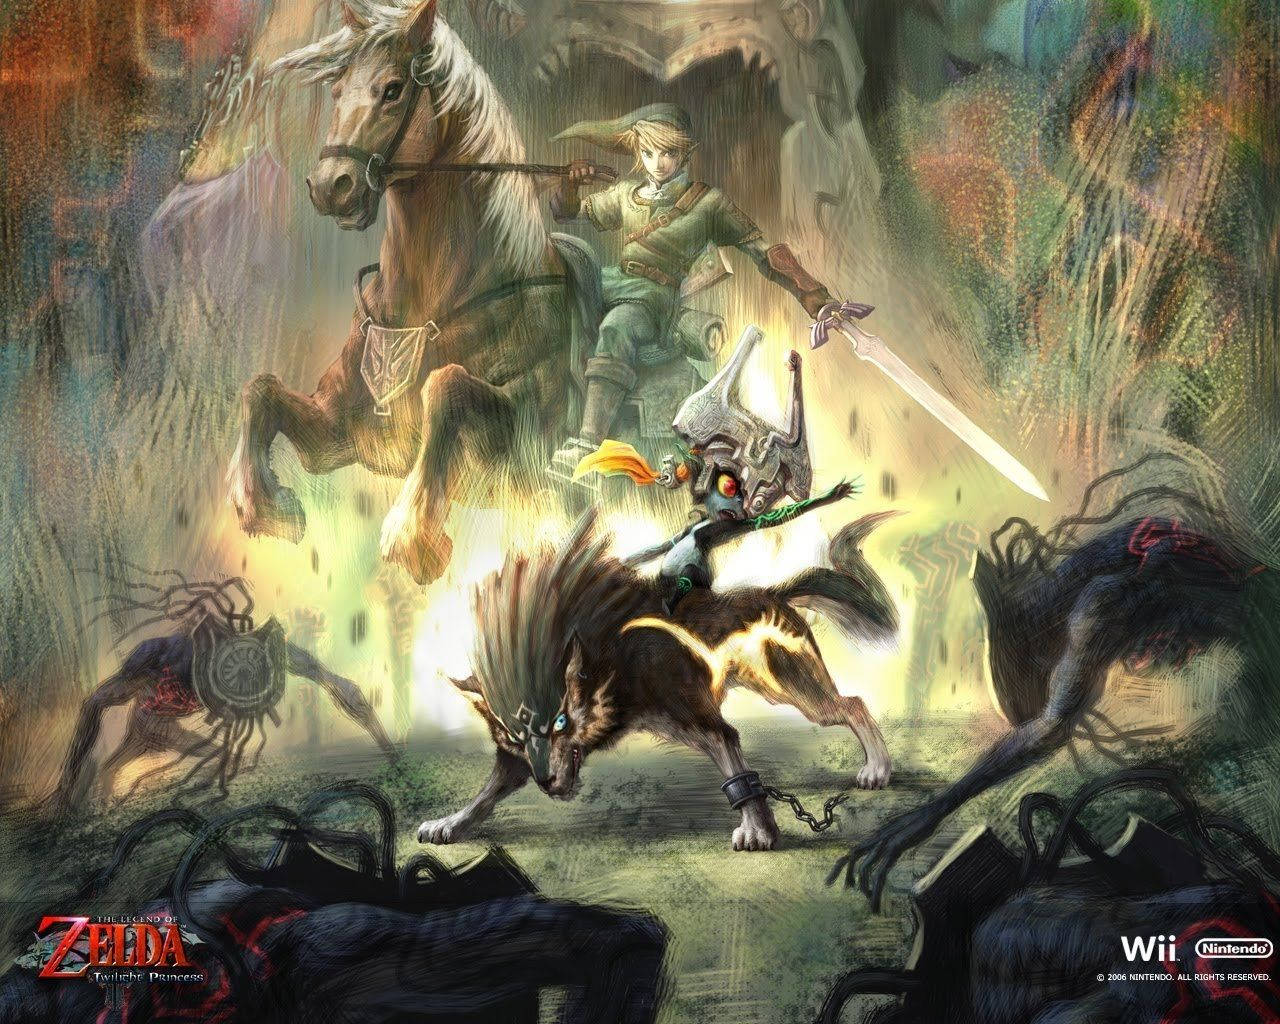 Picture of Link, a legendary figure in the Zelda Universe Wallpaper